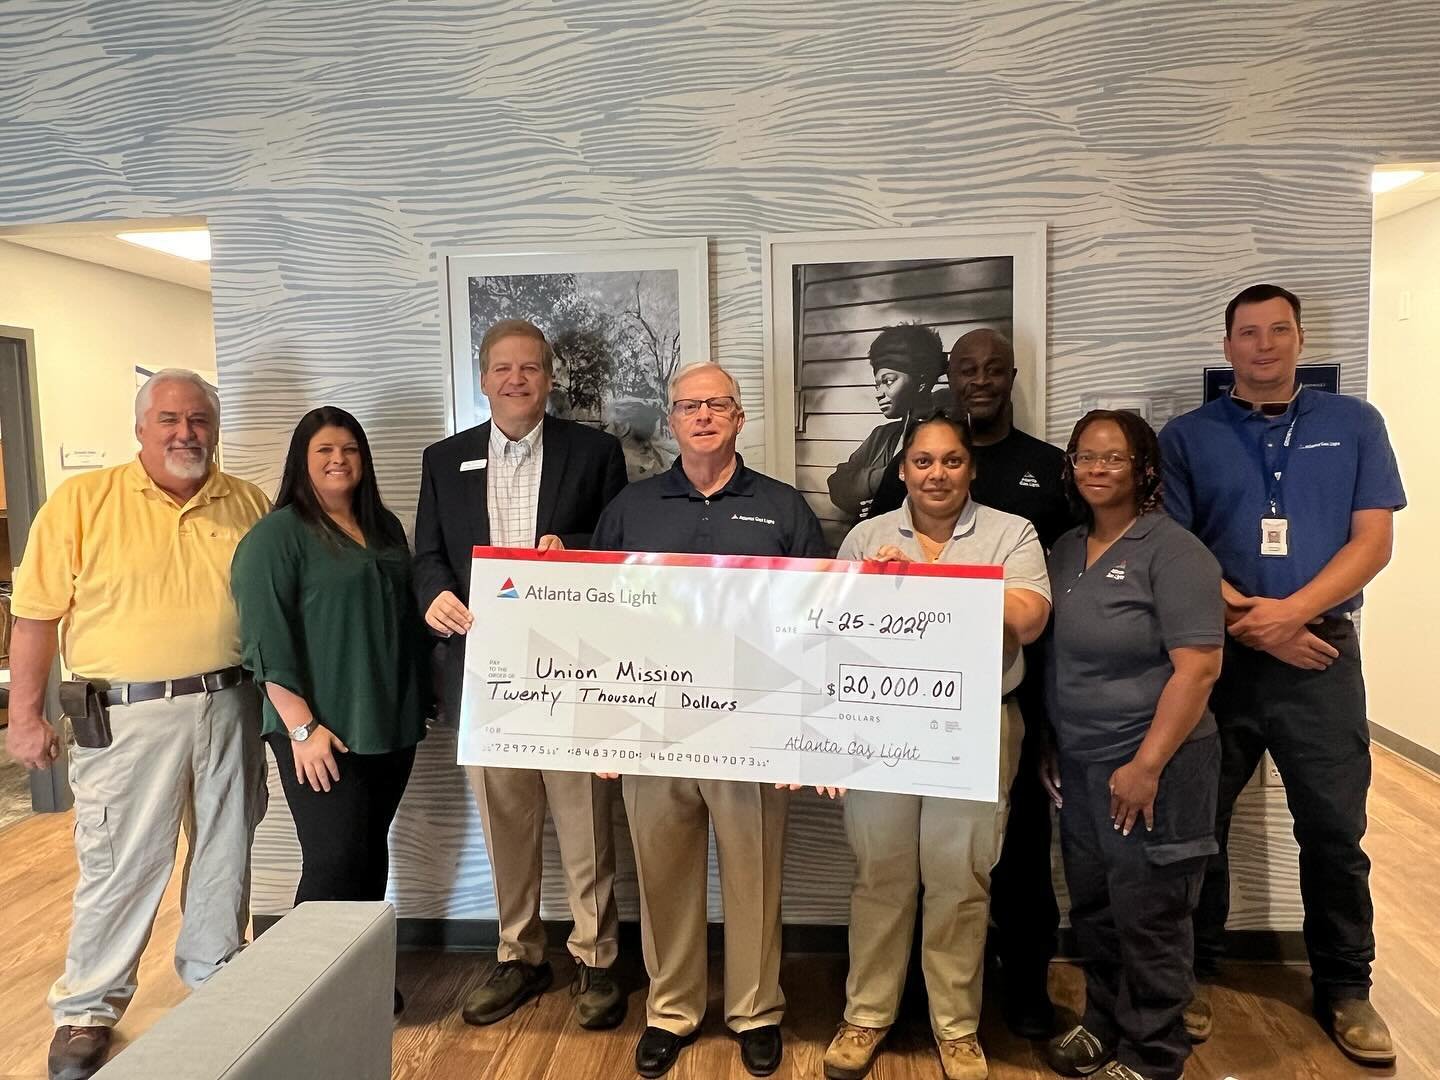 Grateful to Atlanta Gas Light for their generous support of Union Mission and the incredible impact it has on our clients&rsquo; lives. Together, we&rsquo;re making a difference!